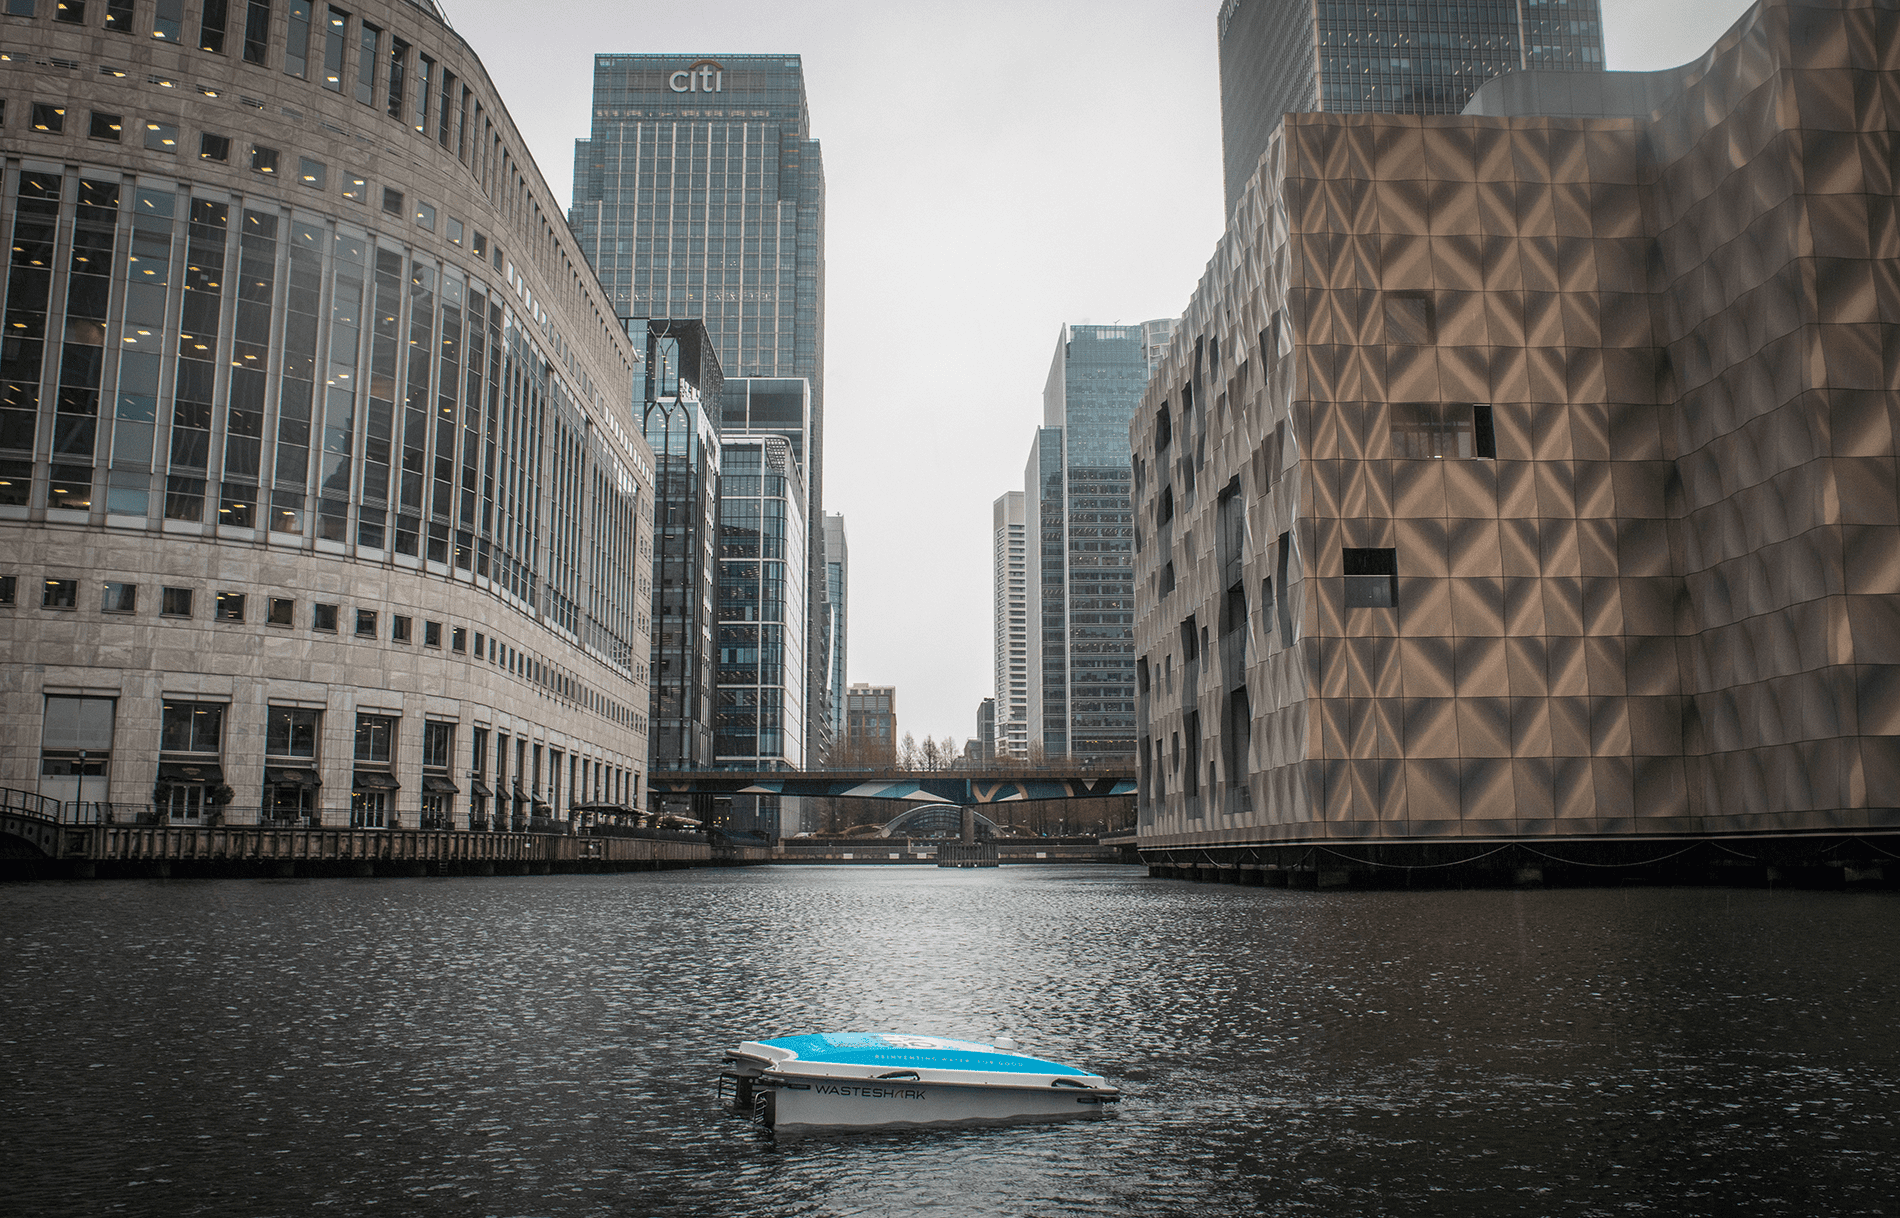 Plastic-eating robot shark deployed in Canary Wharf